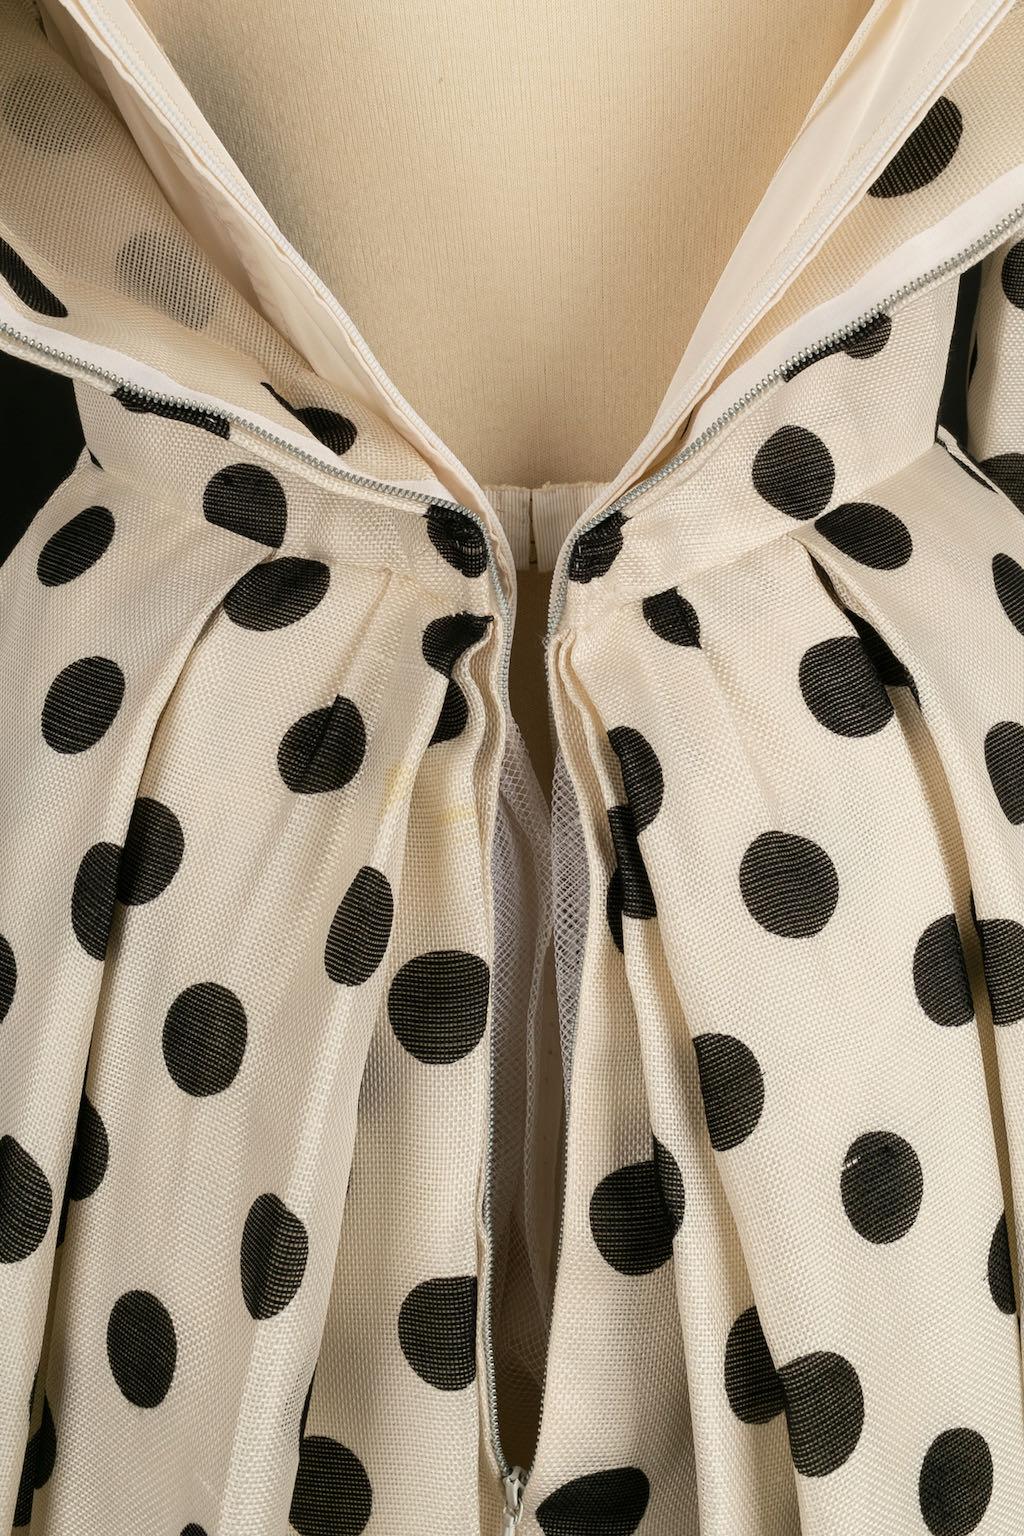 Christian Dior Haute Couture White Canvas with Dots Dress For Sale 3